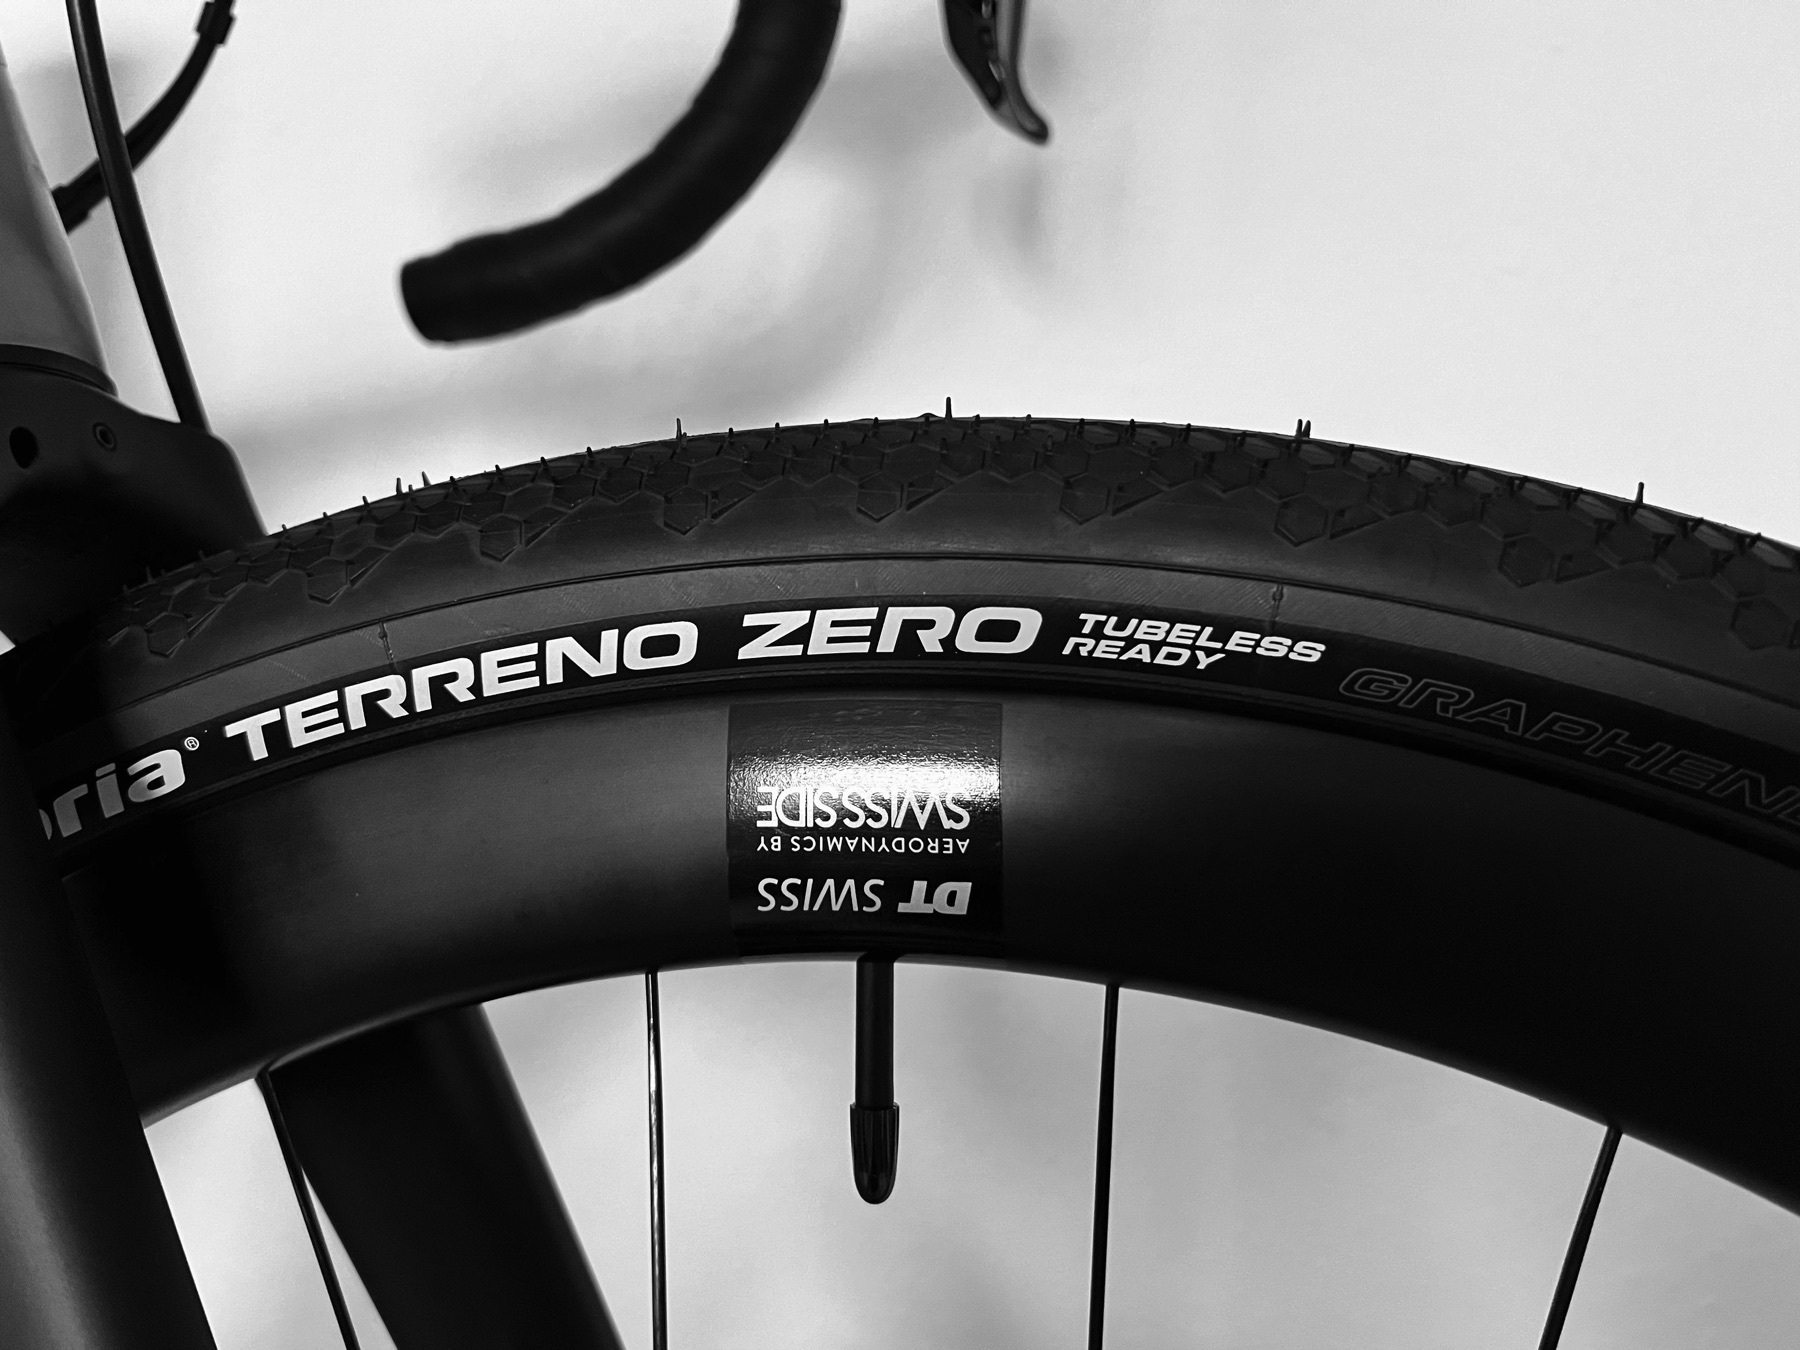 Upper fifth of a mixed surface tyre with a black semi-slick tread and grey sidewalls. The tyre is mounted on a high-flanged carbon rim by DT Swiss. The tube valve is visible. Outside of the center of the image, parts of the carbon for and the left drop and brake/shift lever of the handlebars is visible.